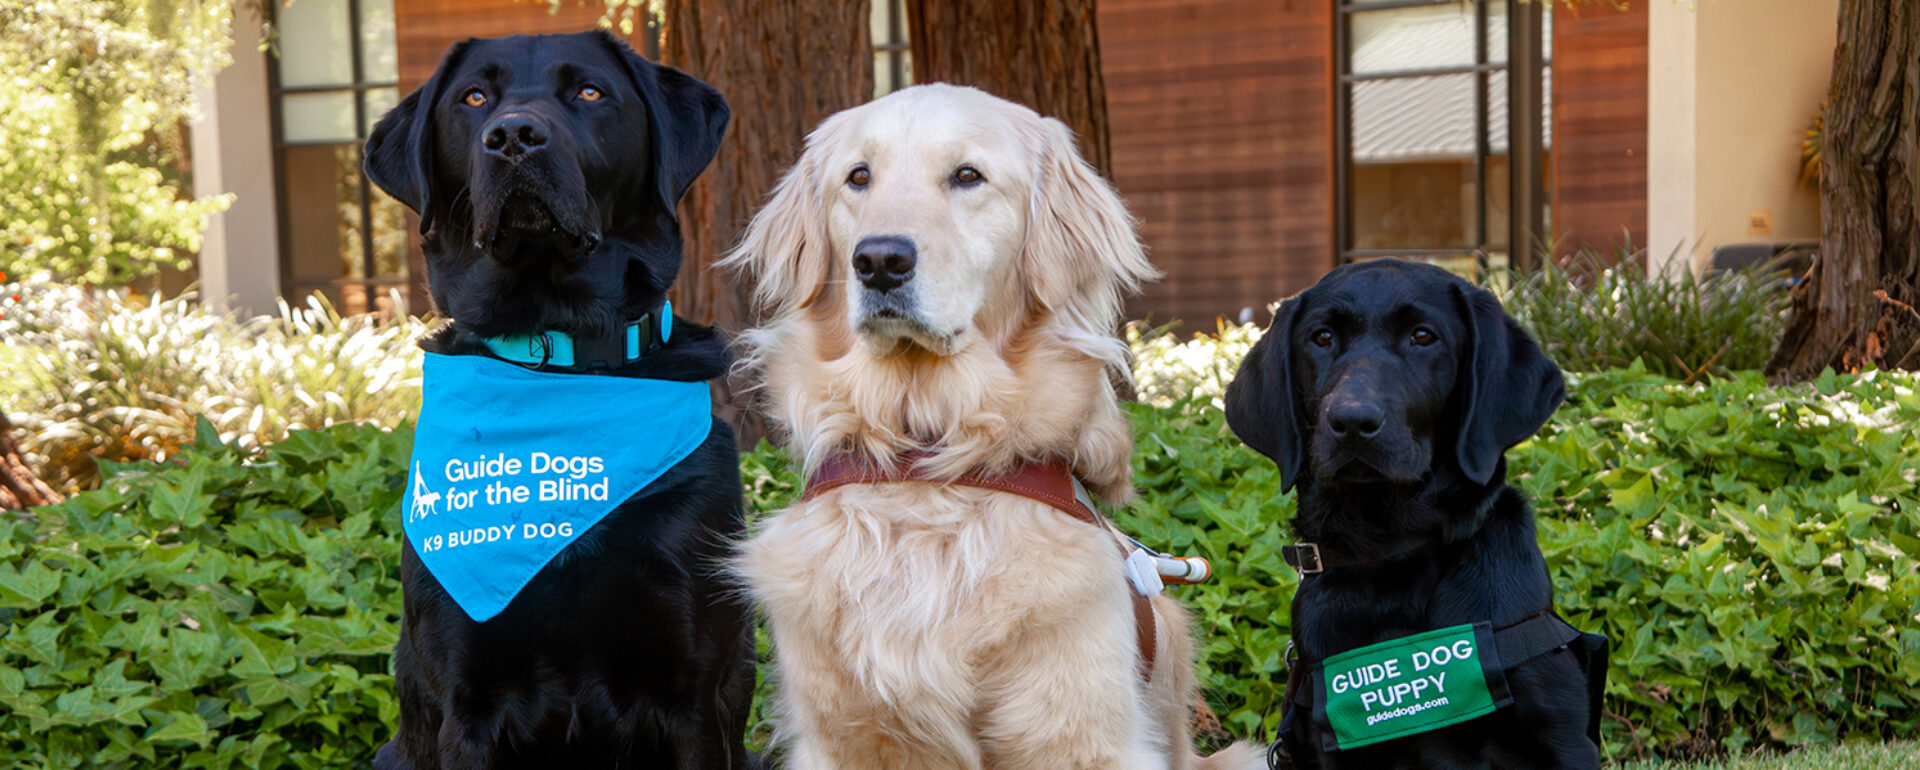 A trio of Guide Dogs for the Blind program dogs: a black Lab K9 Buddy, a Golden guide dog, and a black Lab guide dog puppy.